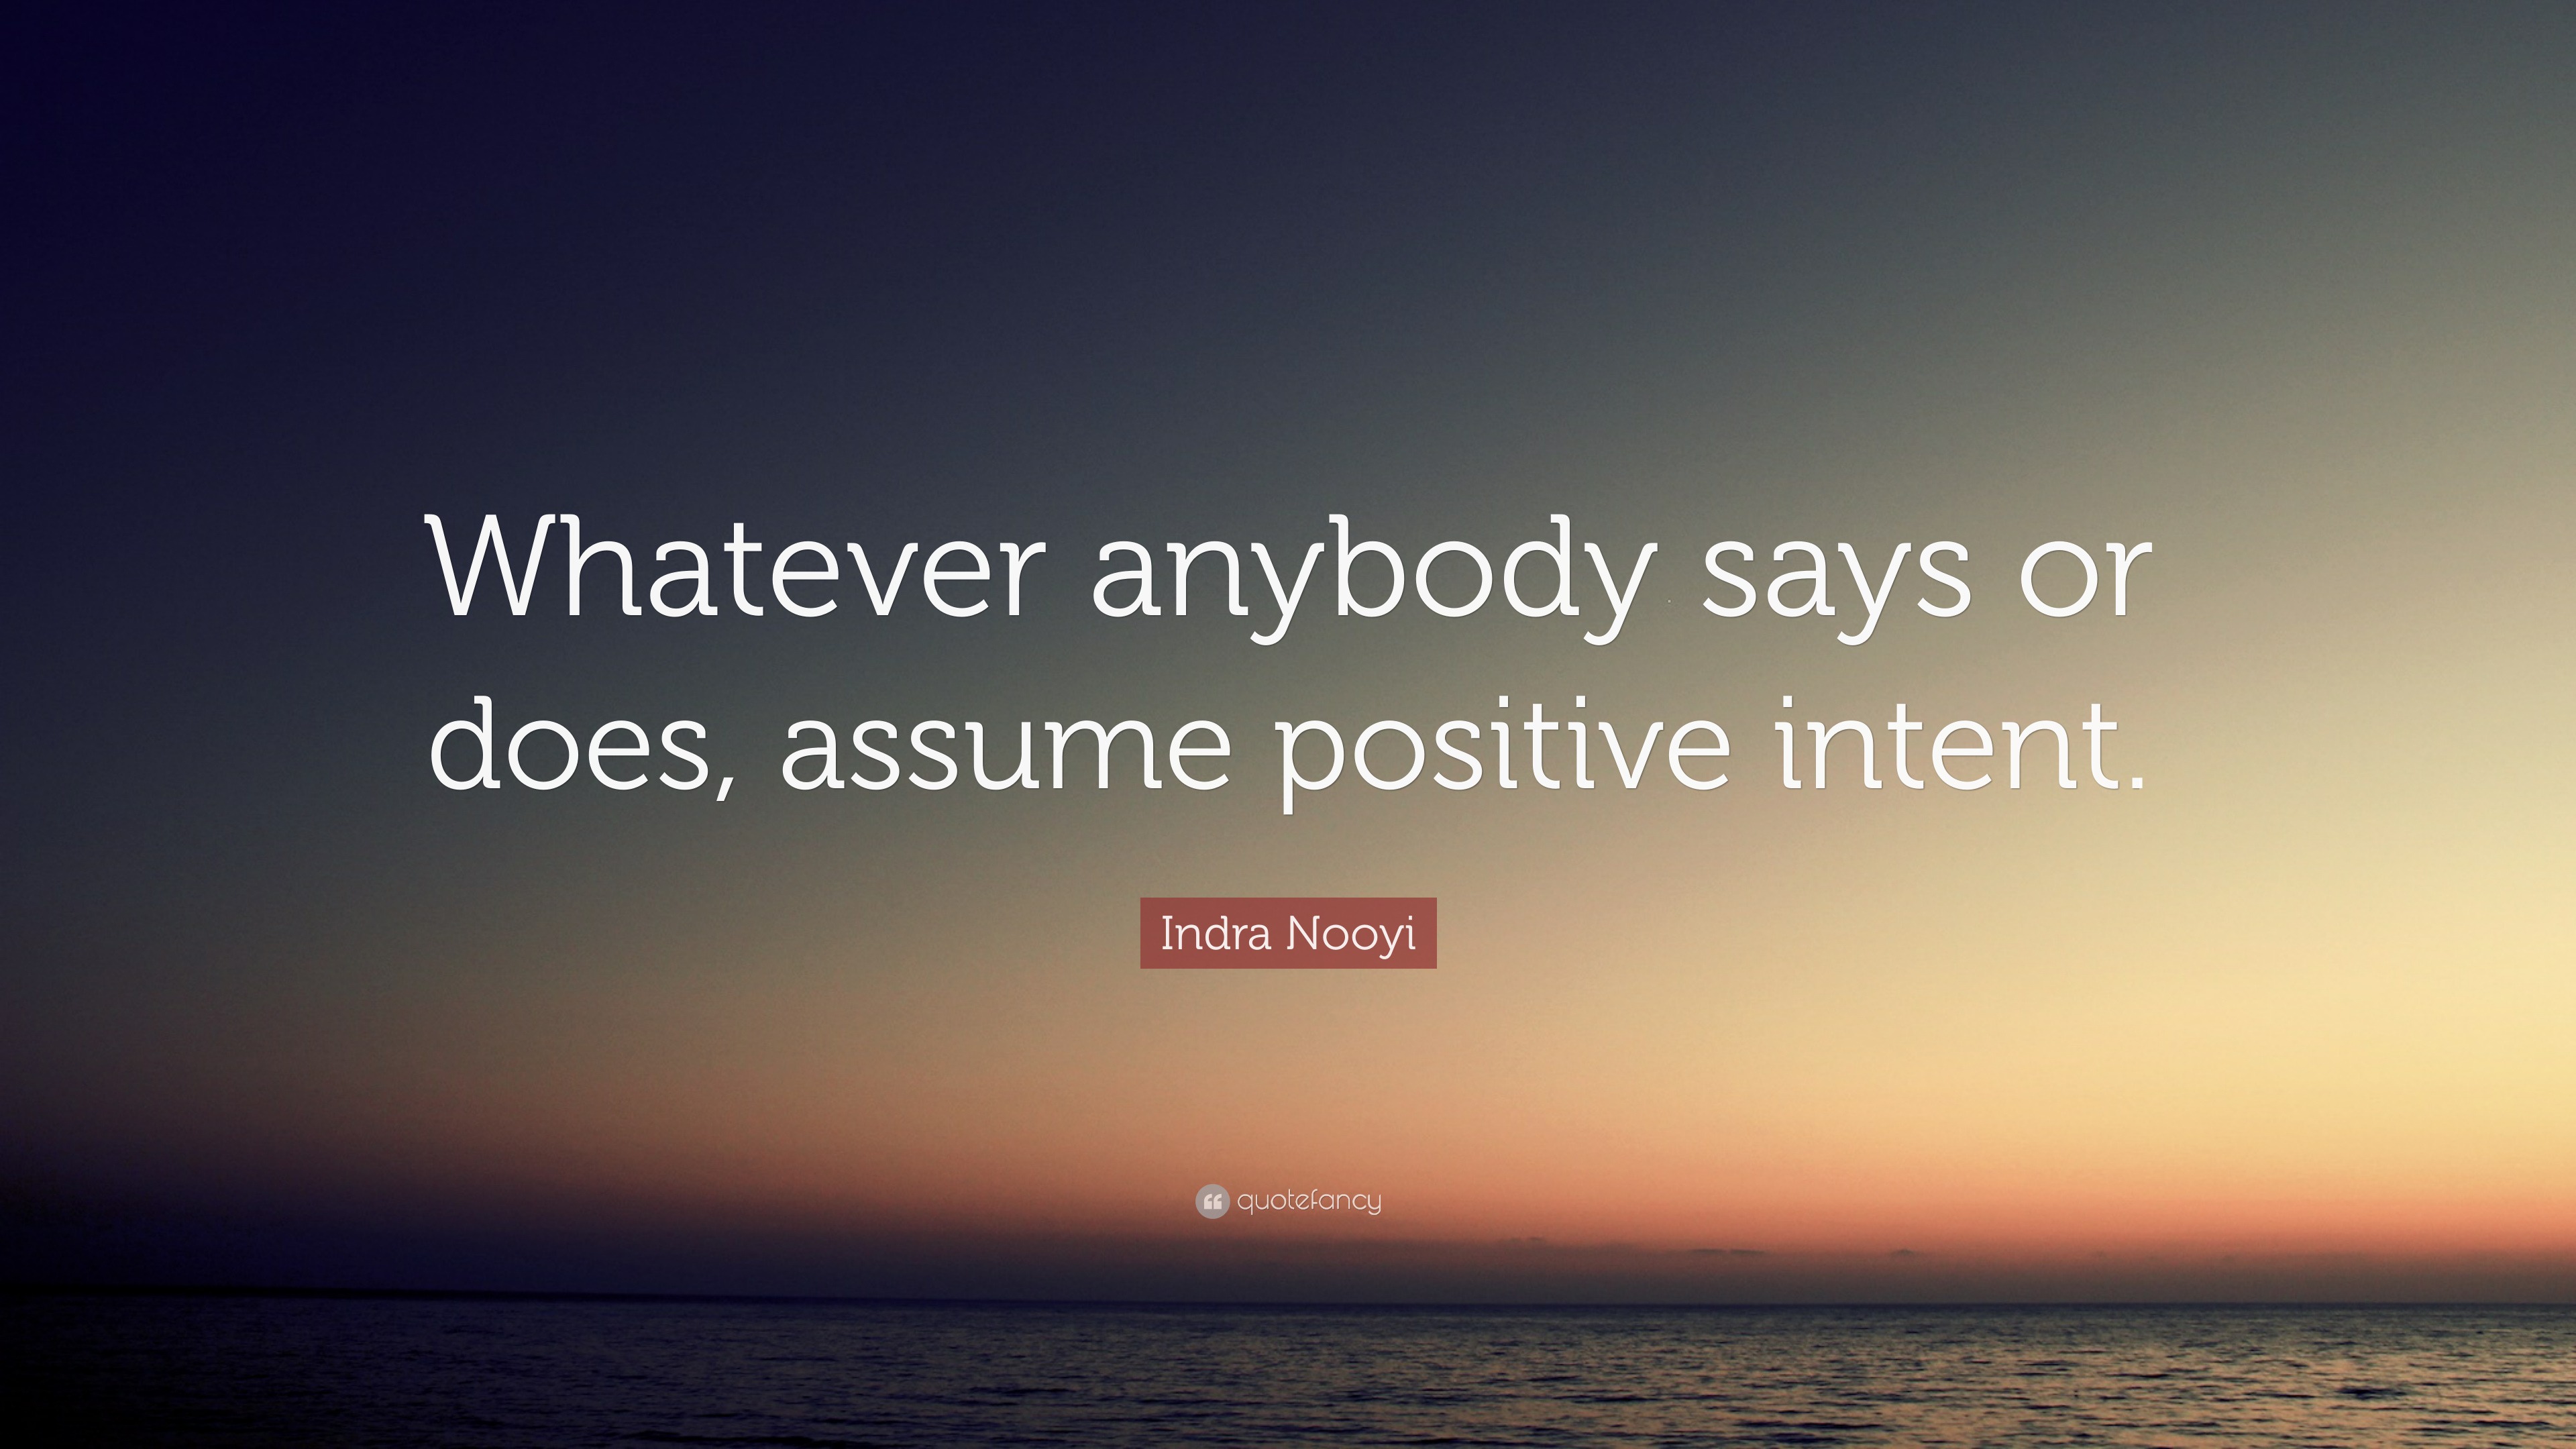 Indra Nooyi Quote: "Whatever anybody says or does, assume positive intent." (9 wallpapers ...